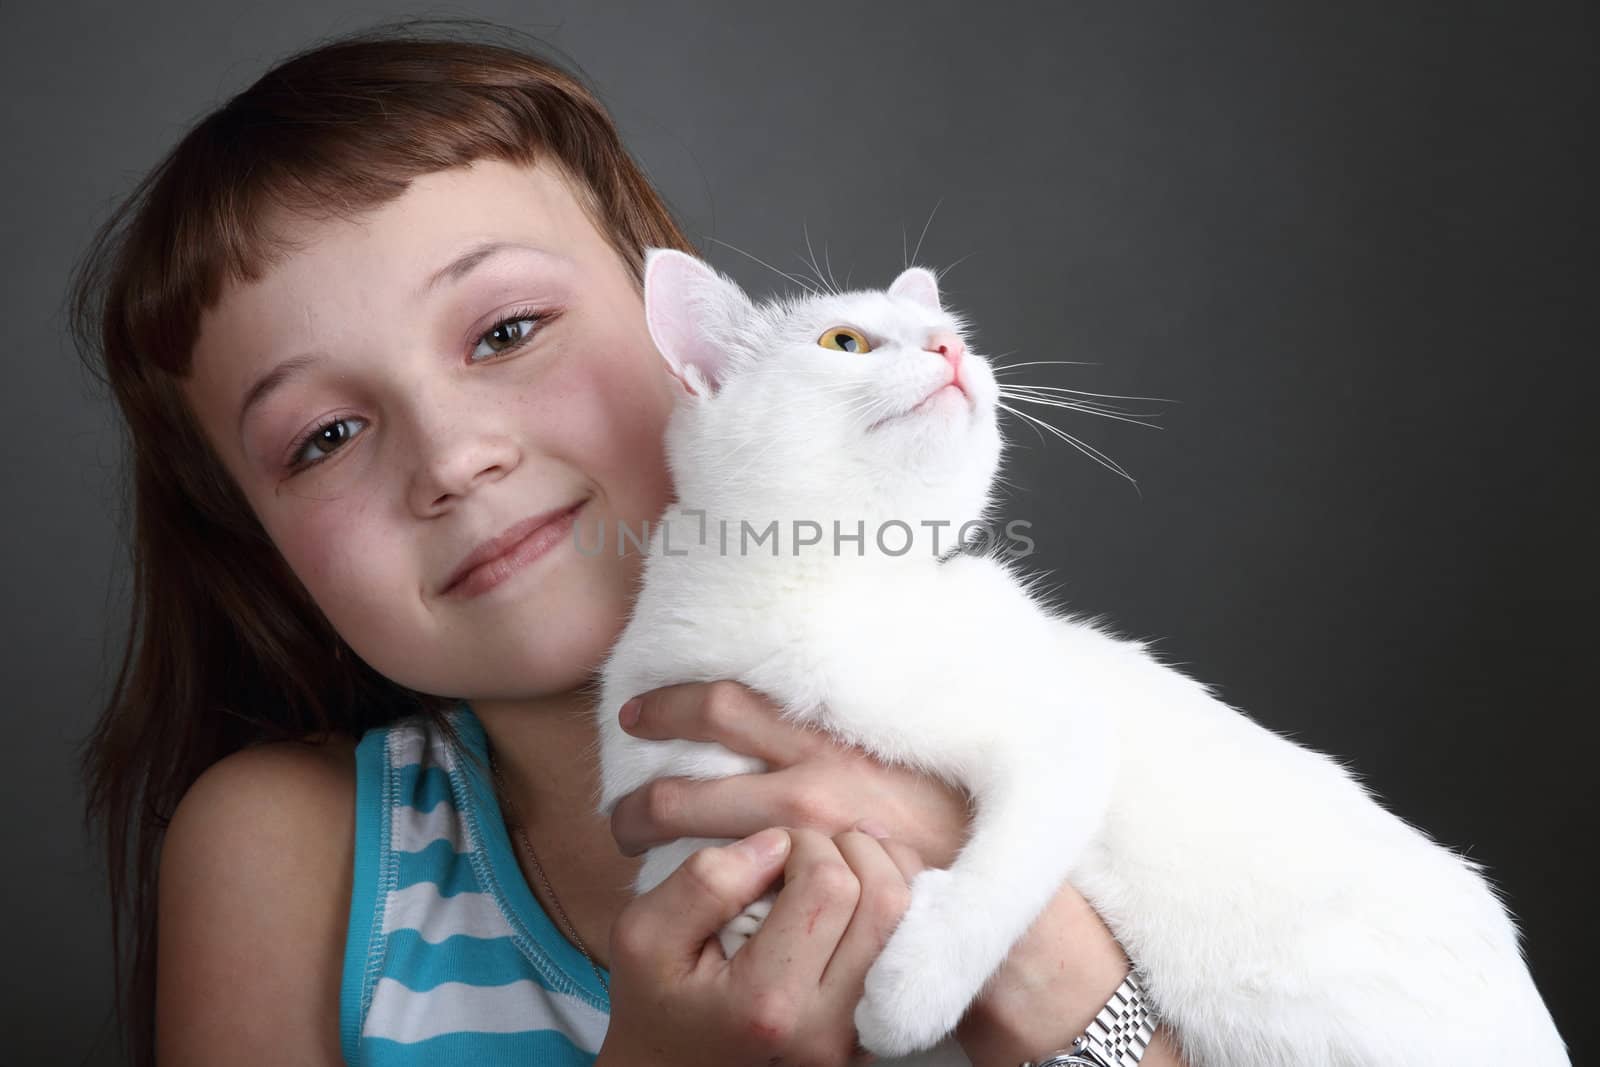 the girl and white cat play. close up. double 2